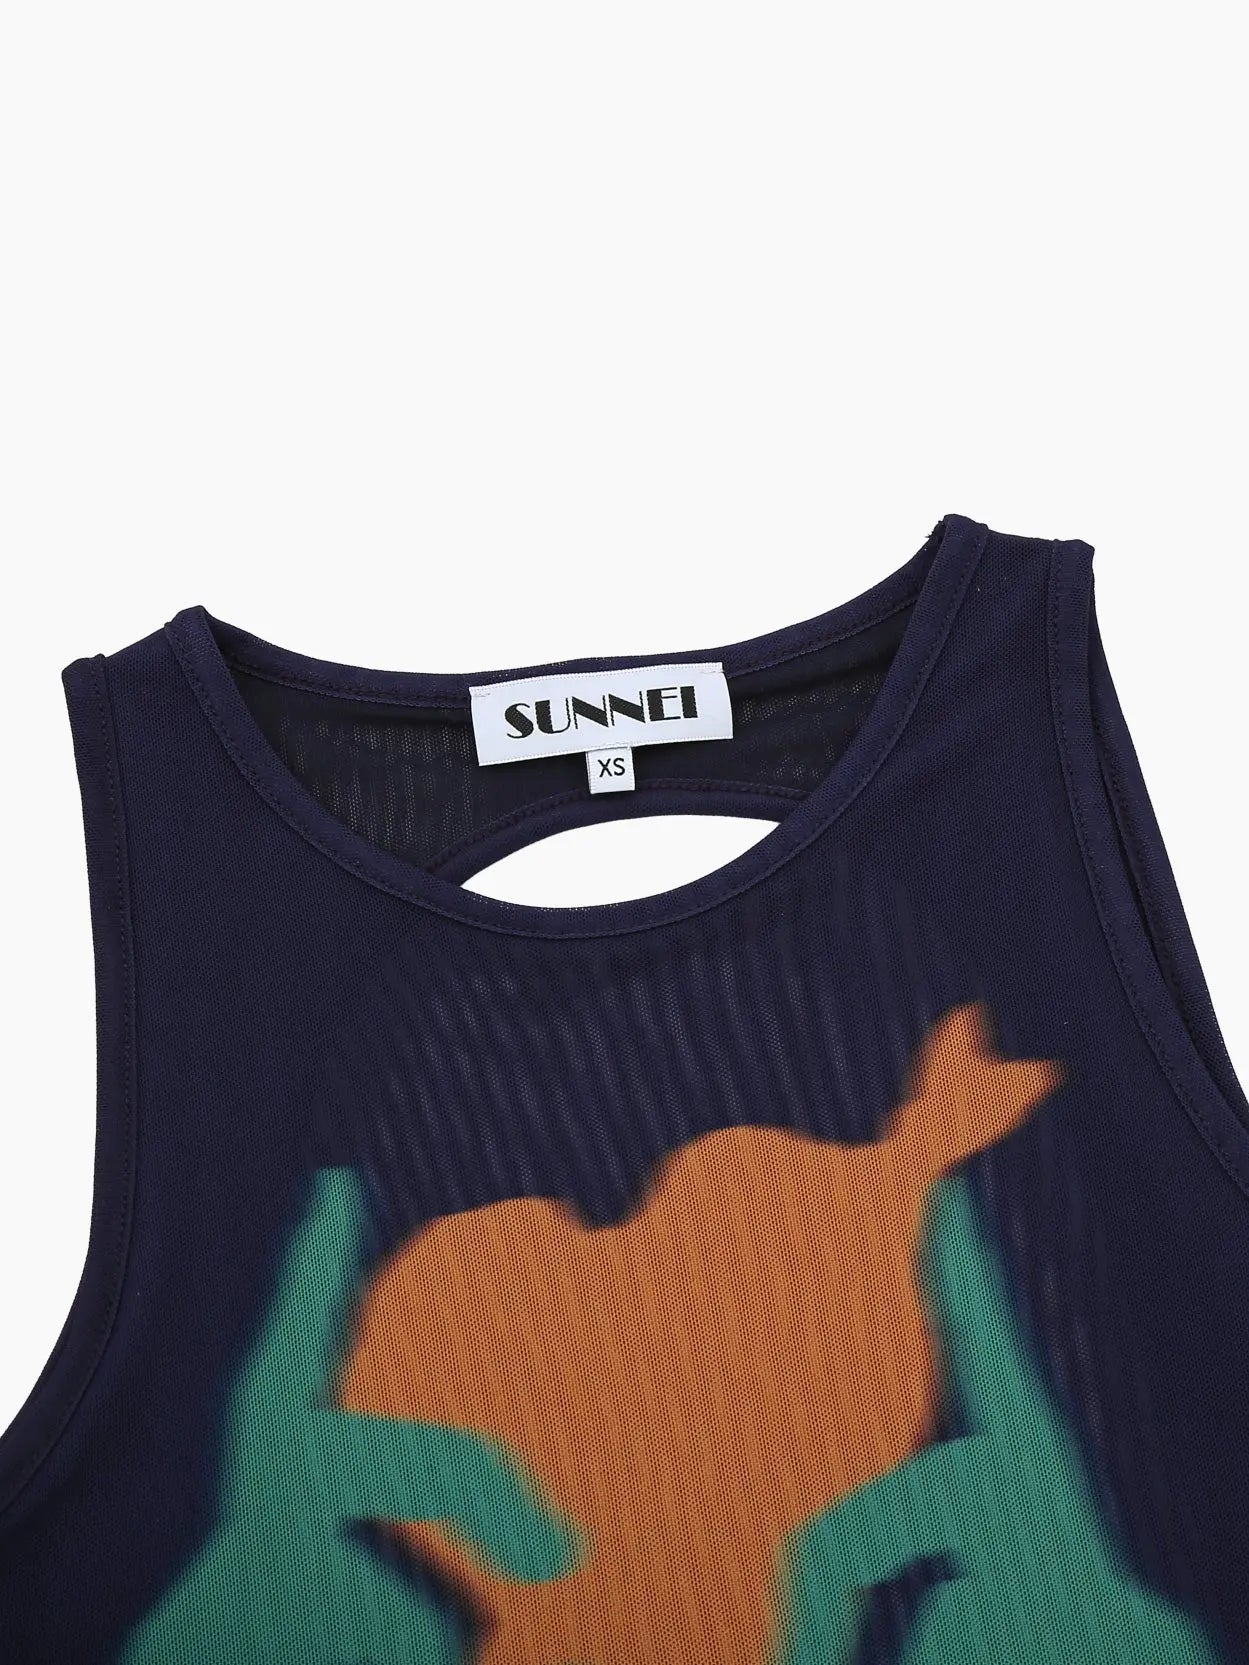 A dark, sleeveless Buco Tulle Top Dark Blue featuring a graphic design of two green hands holding an orange fish. The brand label "Sunnei" is visible at the inside back of the neck. Available exclusively at Bassalstore in Barcelona, the bottom hem is slightly wavy, adding texture to the design.